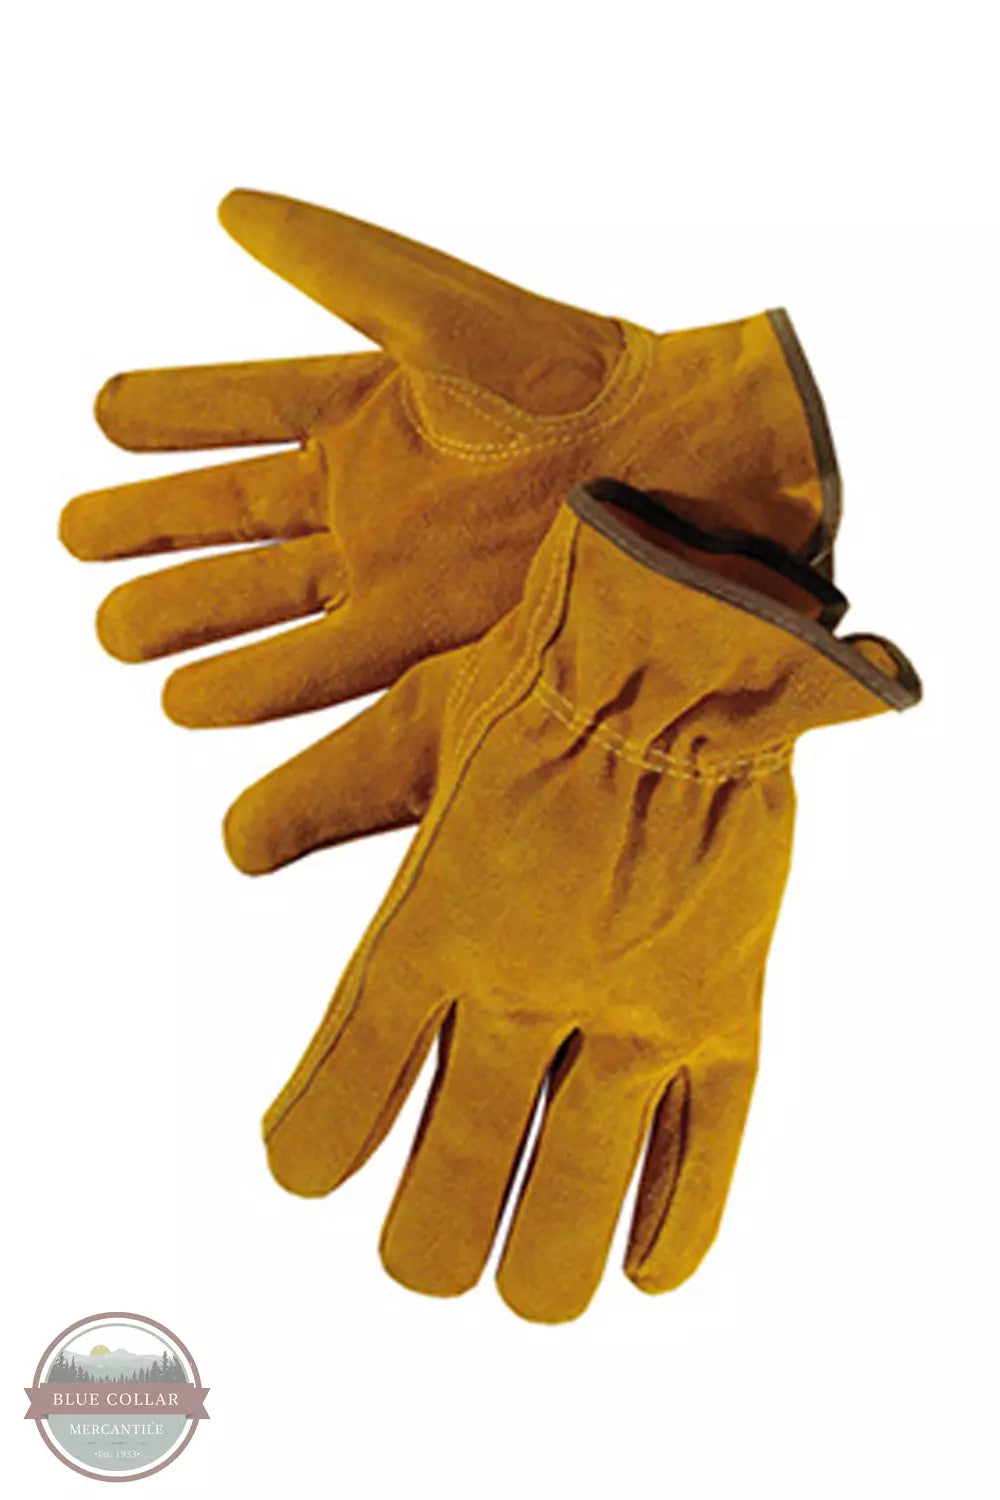  Broner 25-70 Suede Leather Rancher Gloves in Tan Pair View